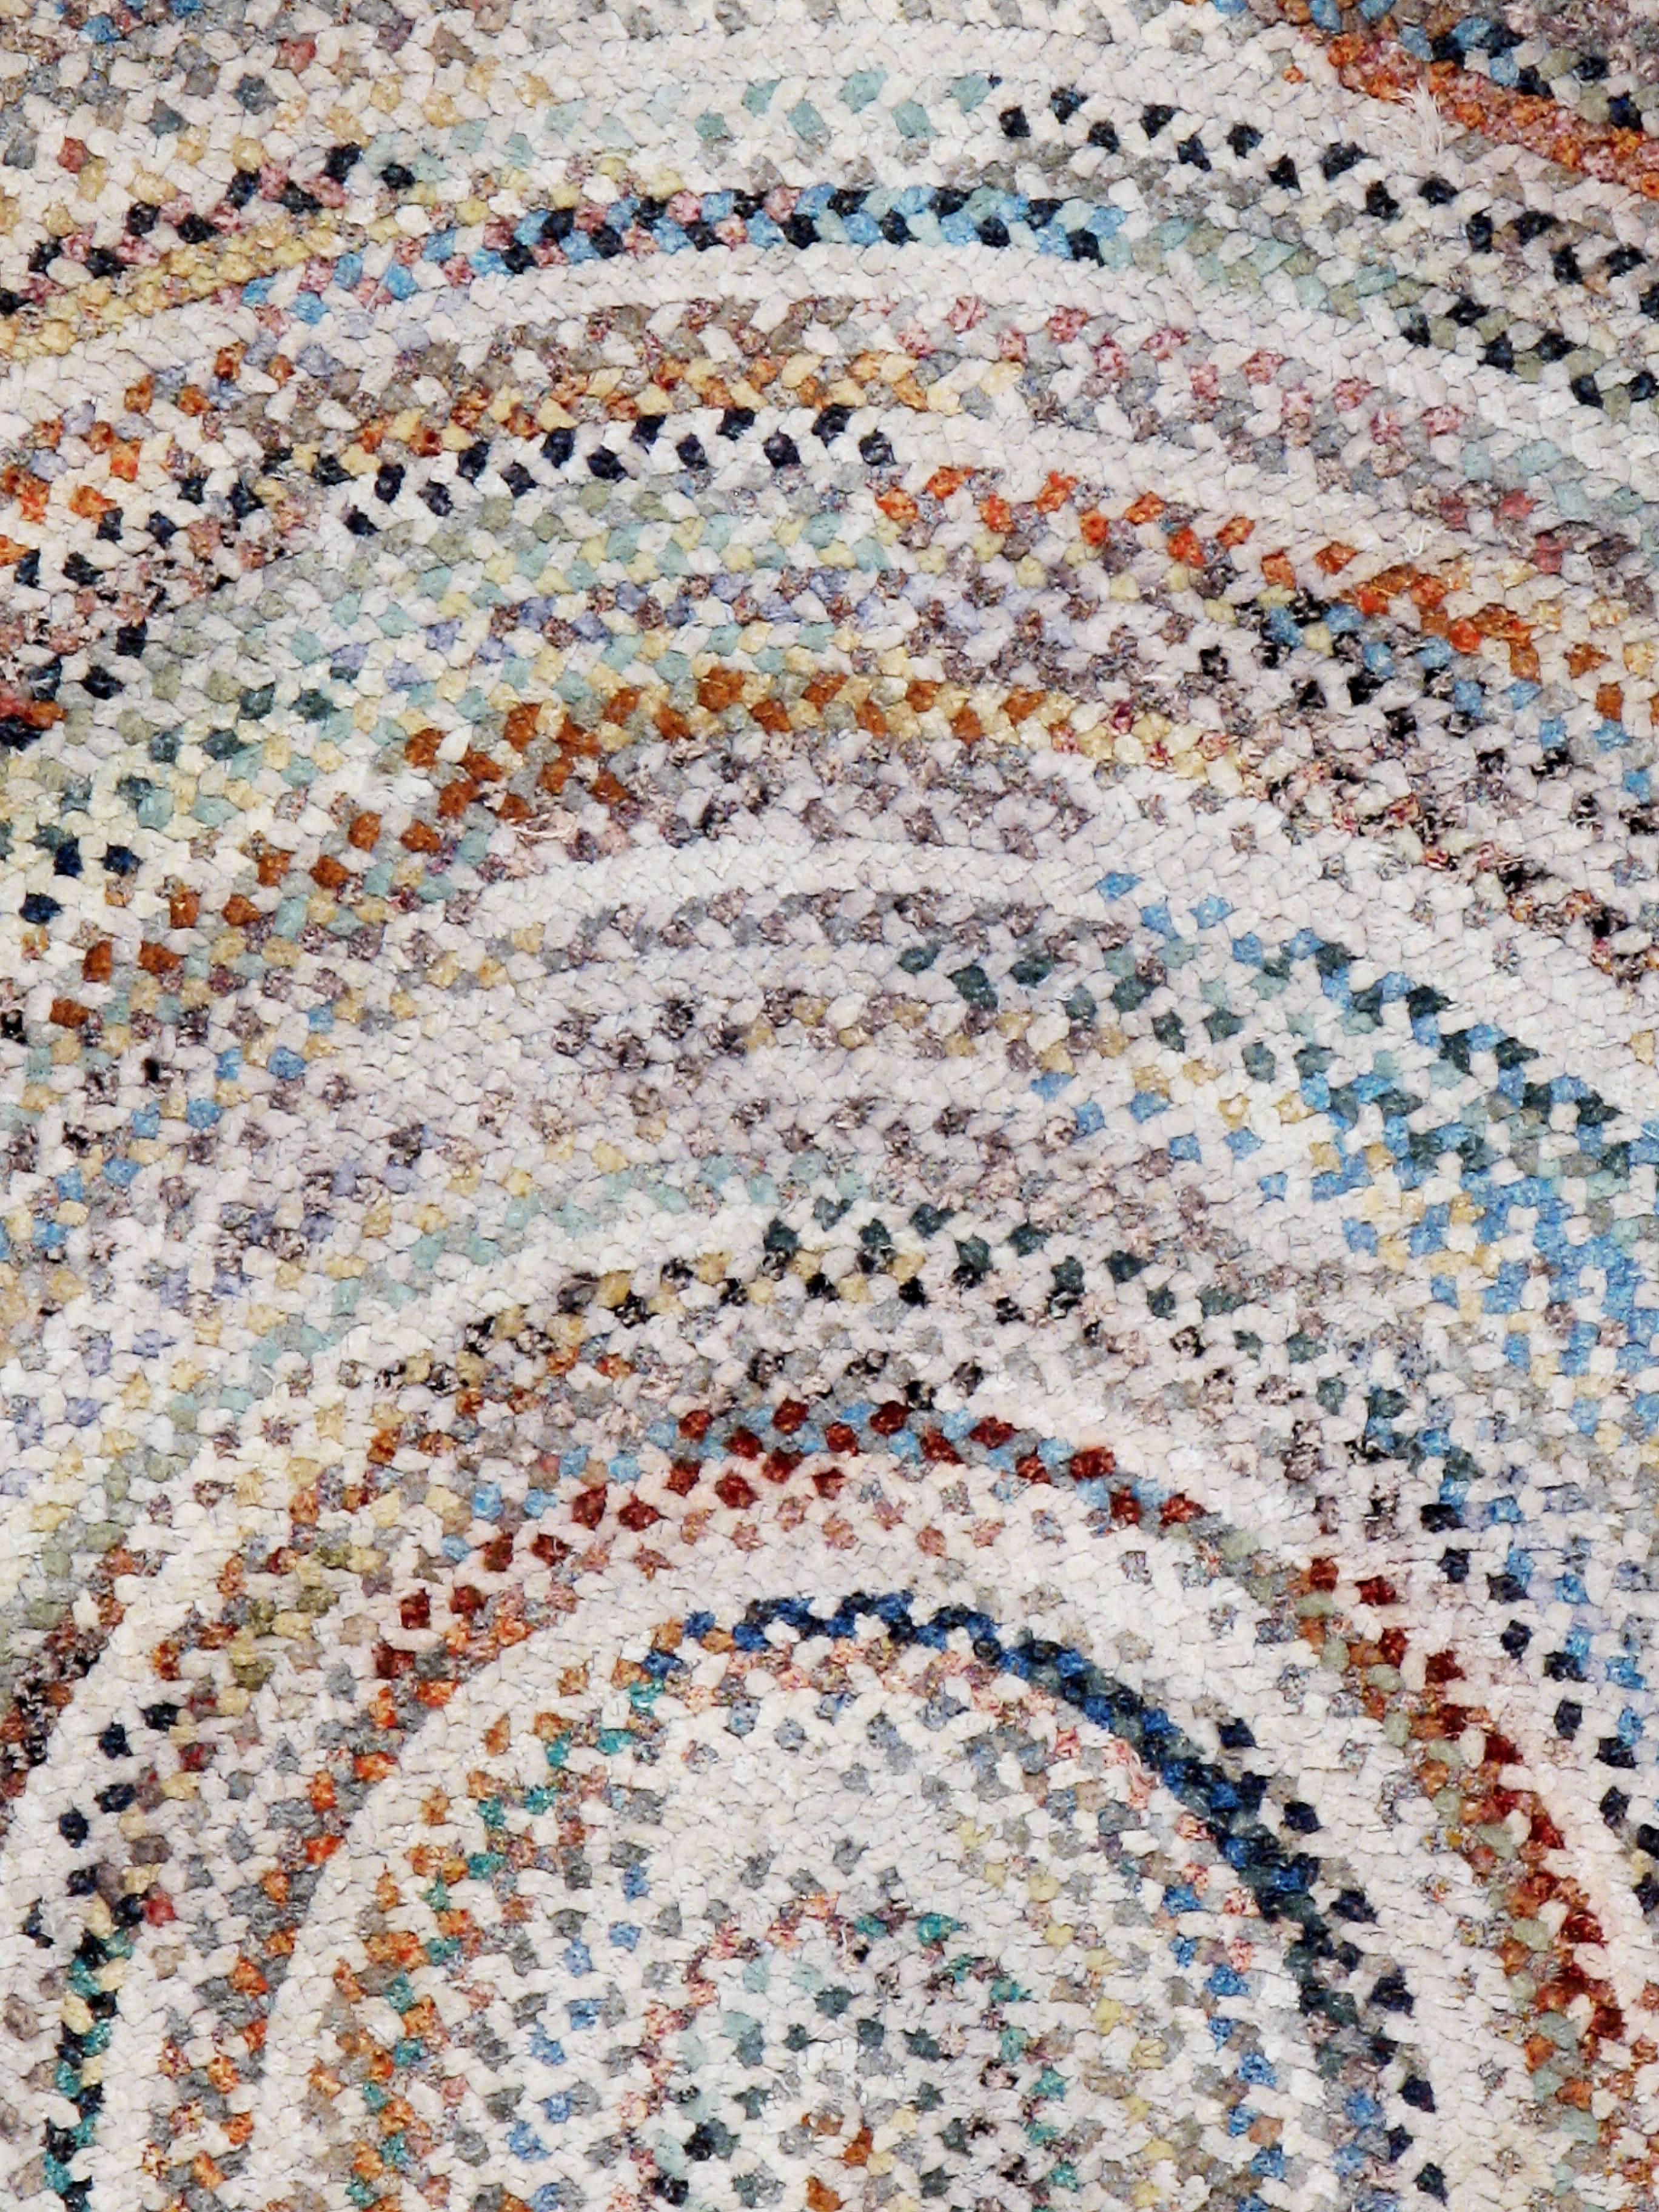 A vintage American Braid carpet from the mid-20th century.